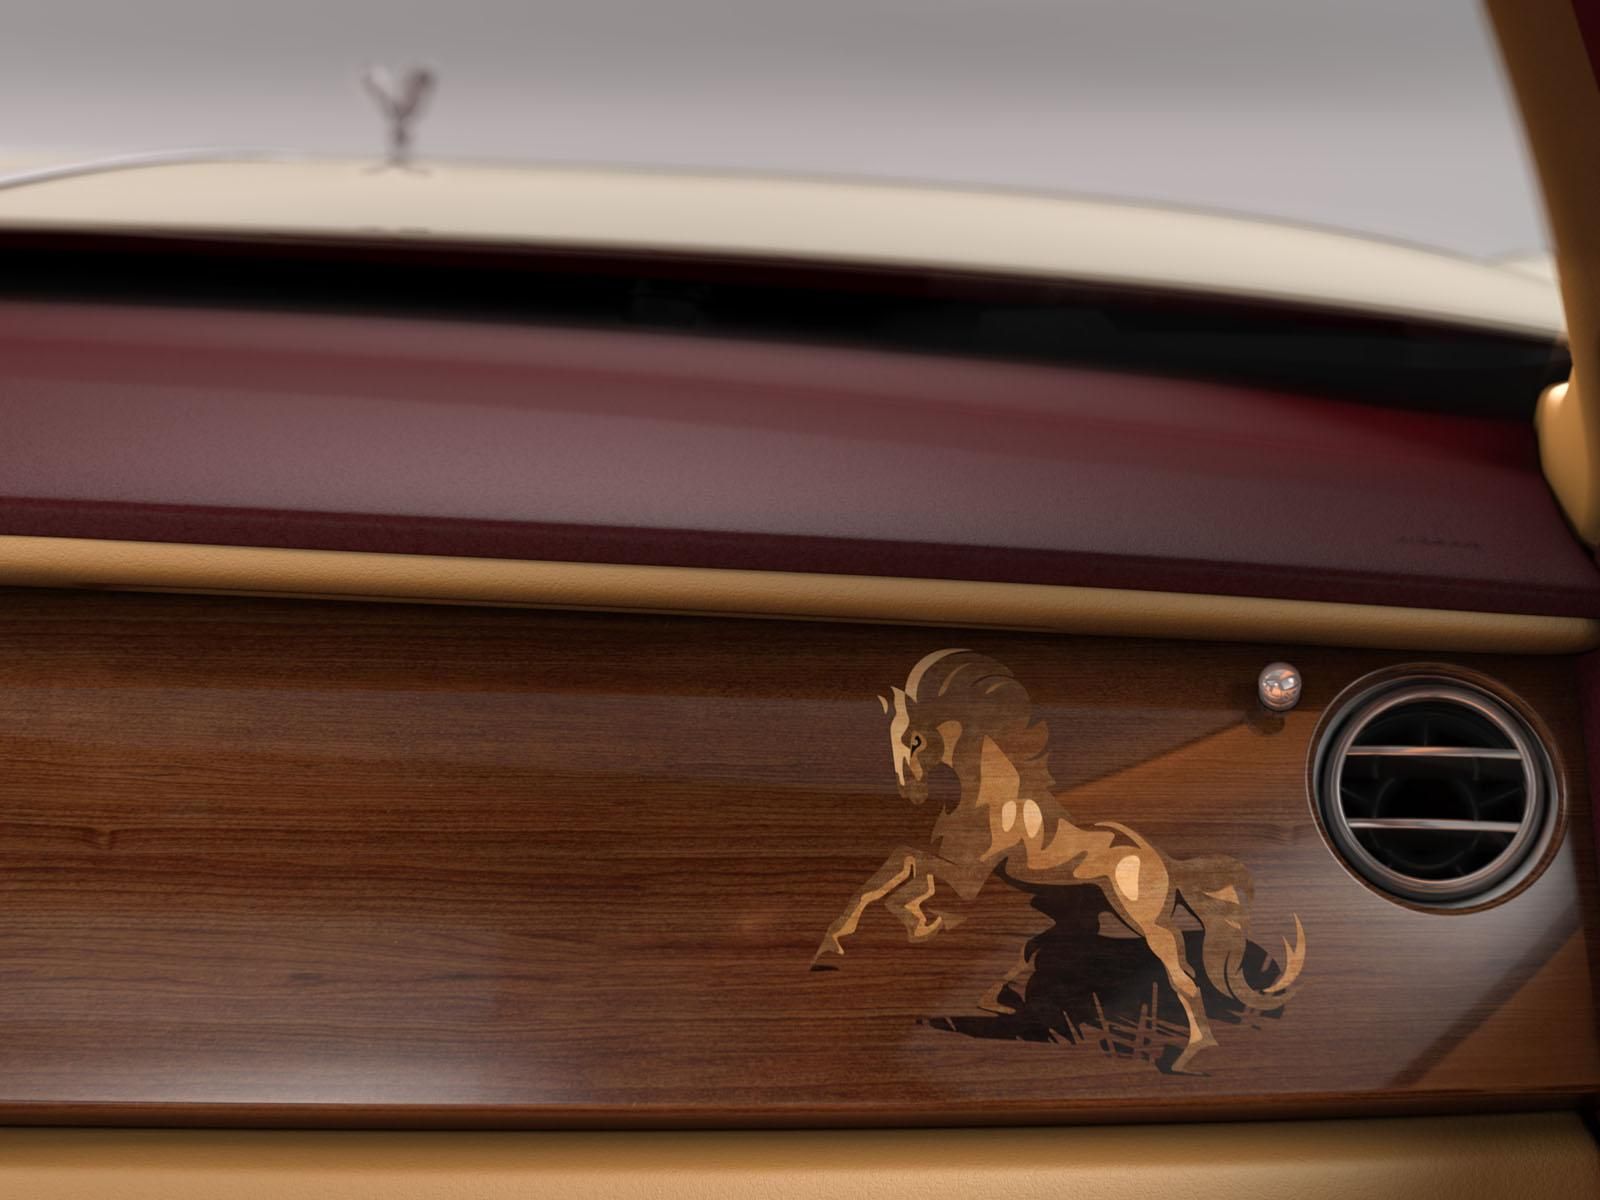 2014 Rolls-Royce Ghost Majestic Horse Edition